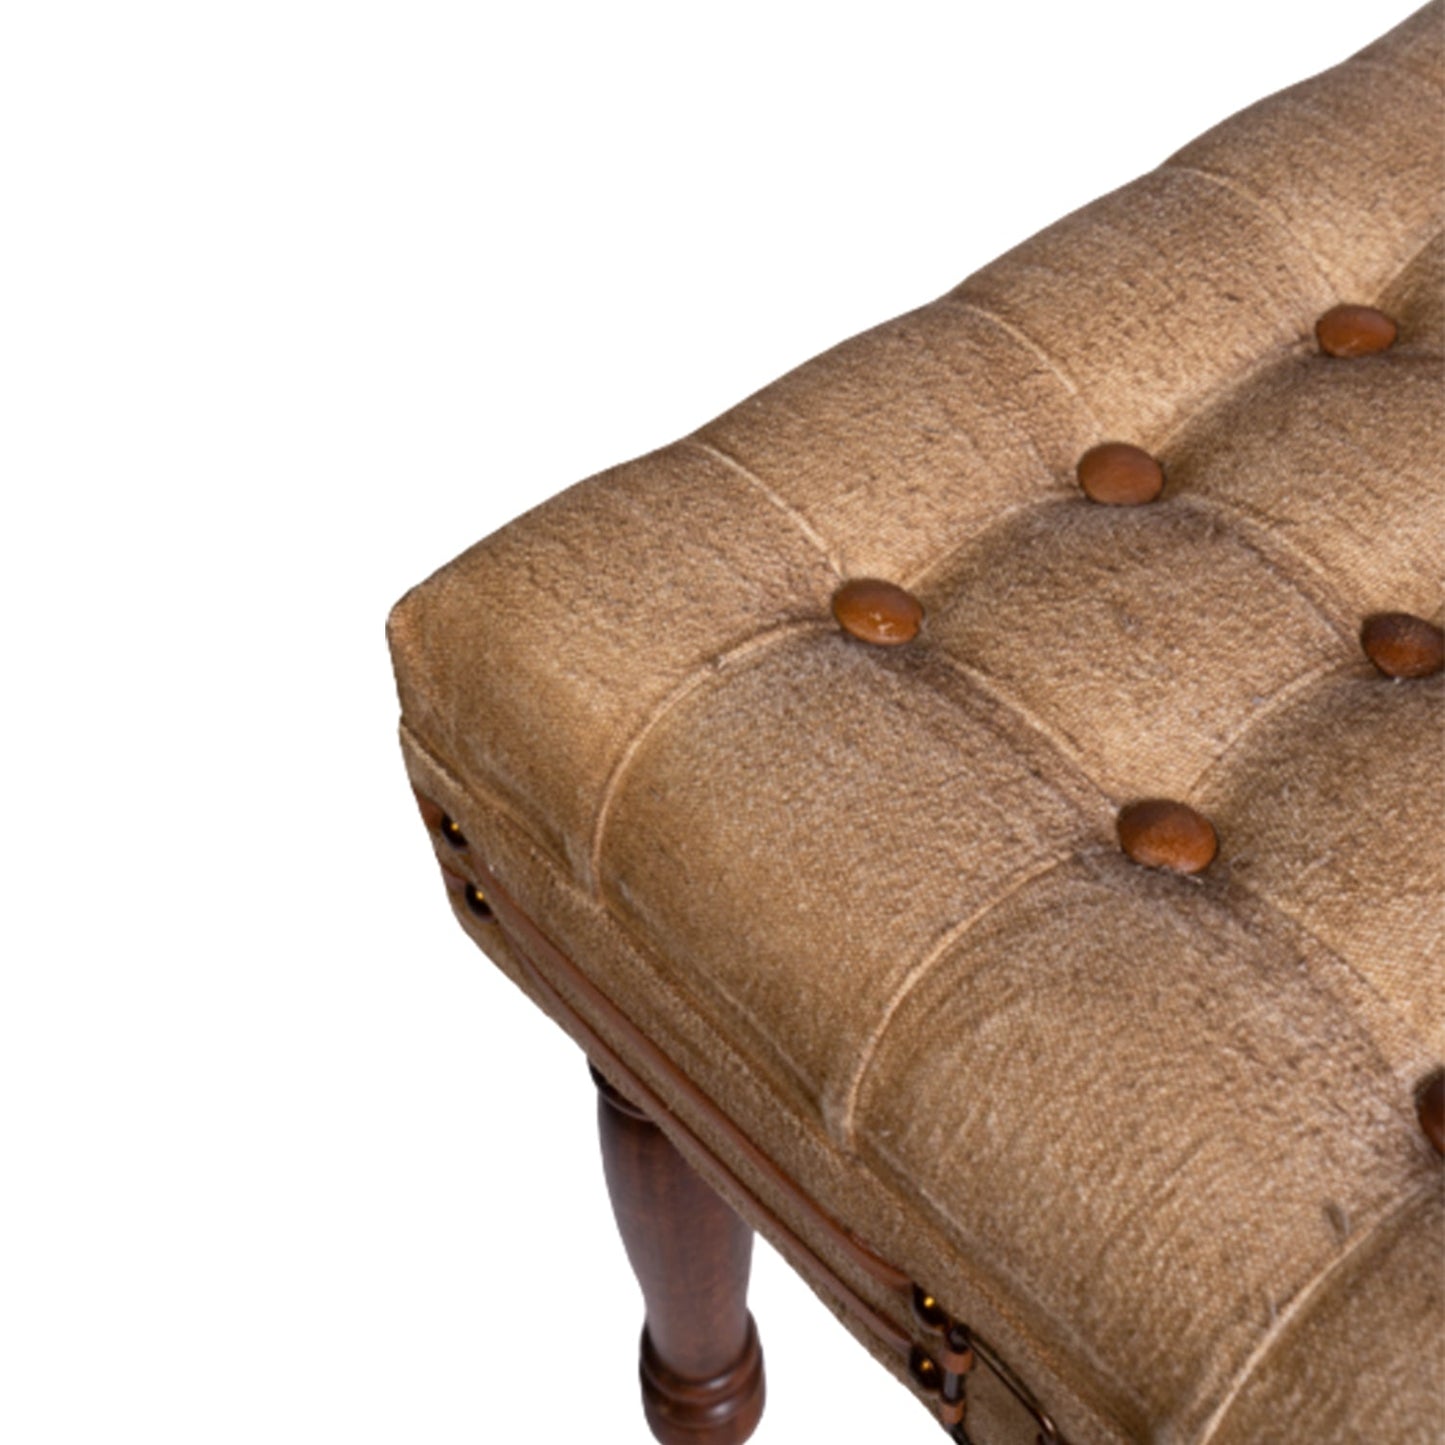 Vintage Style Square Ottoman with Canvas Seat and Wooden Legs - Stylla London